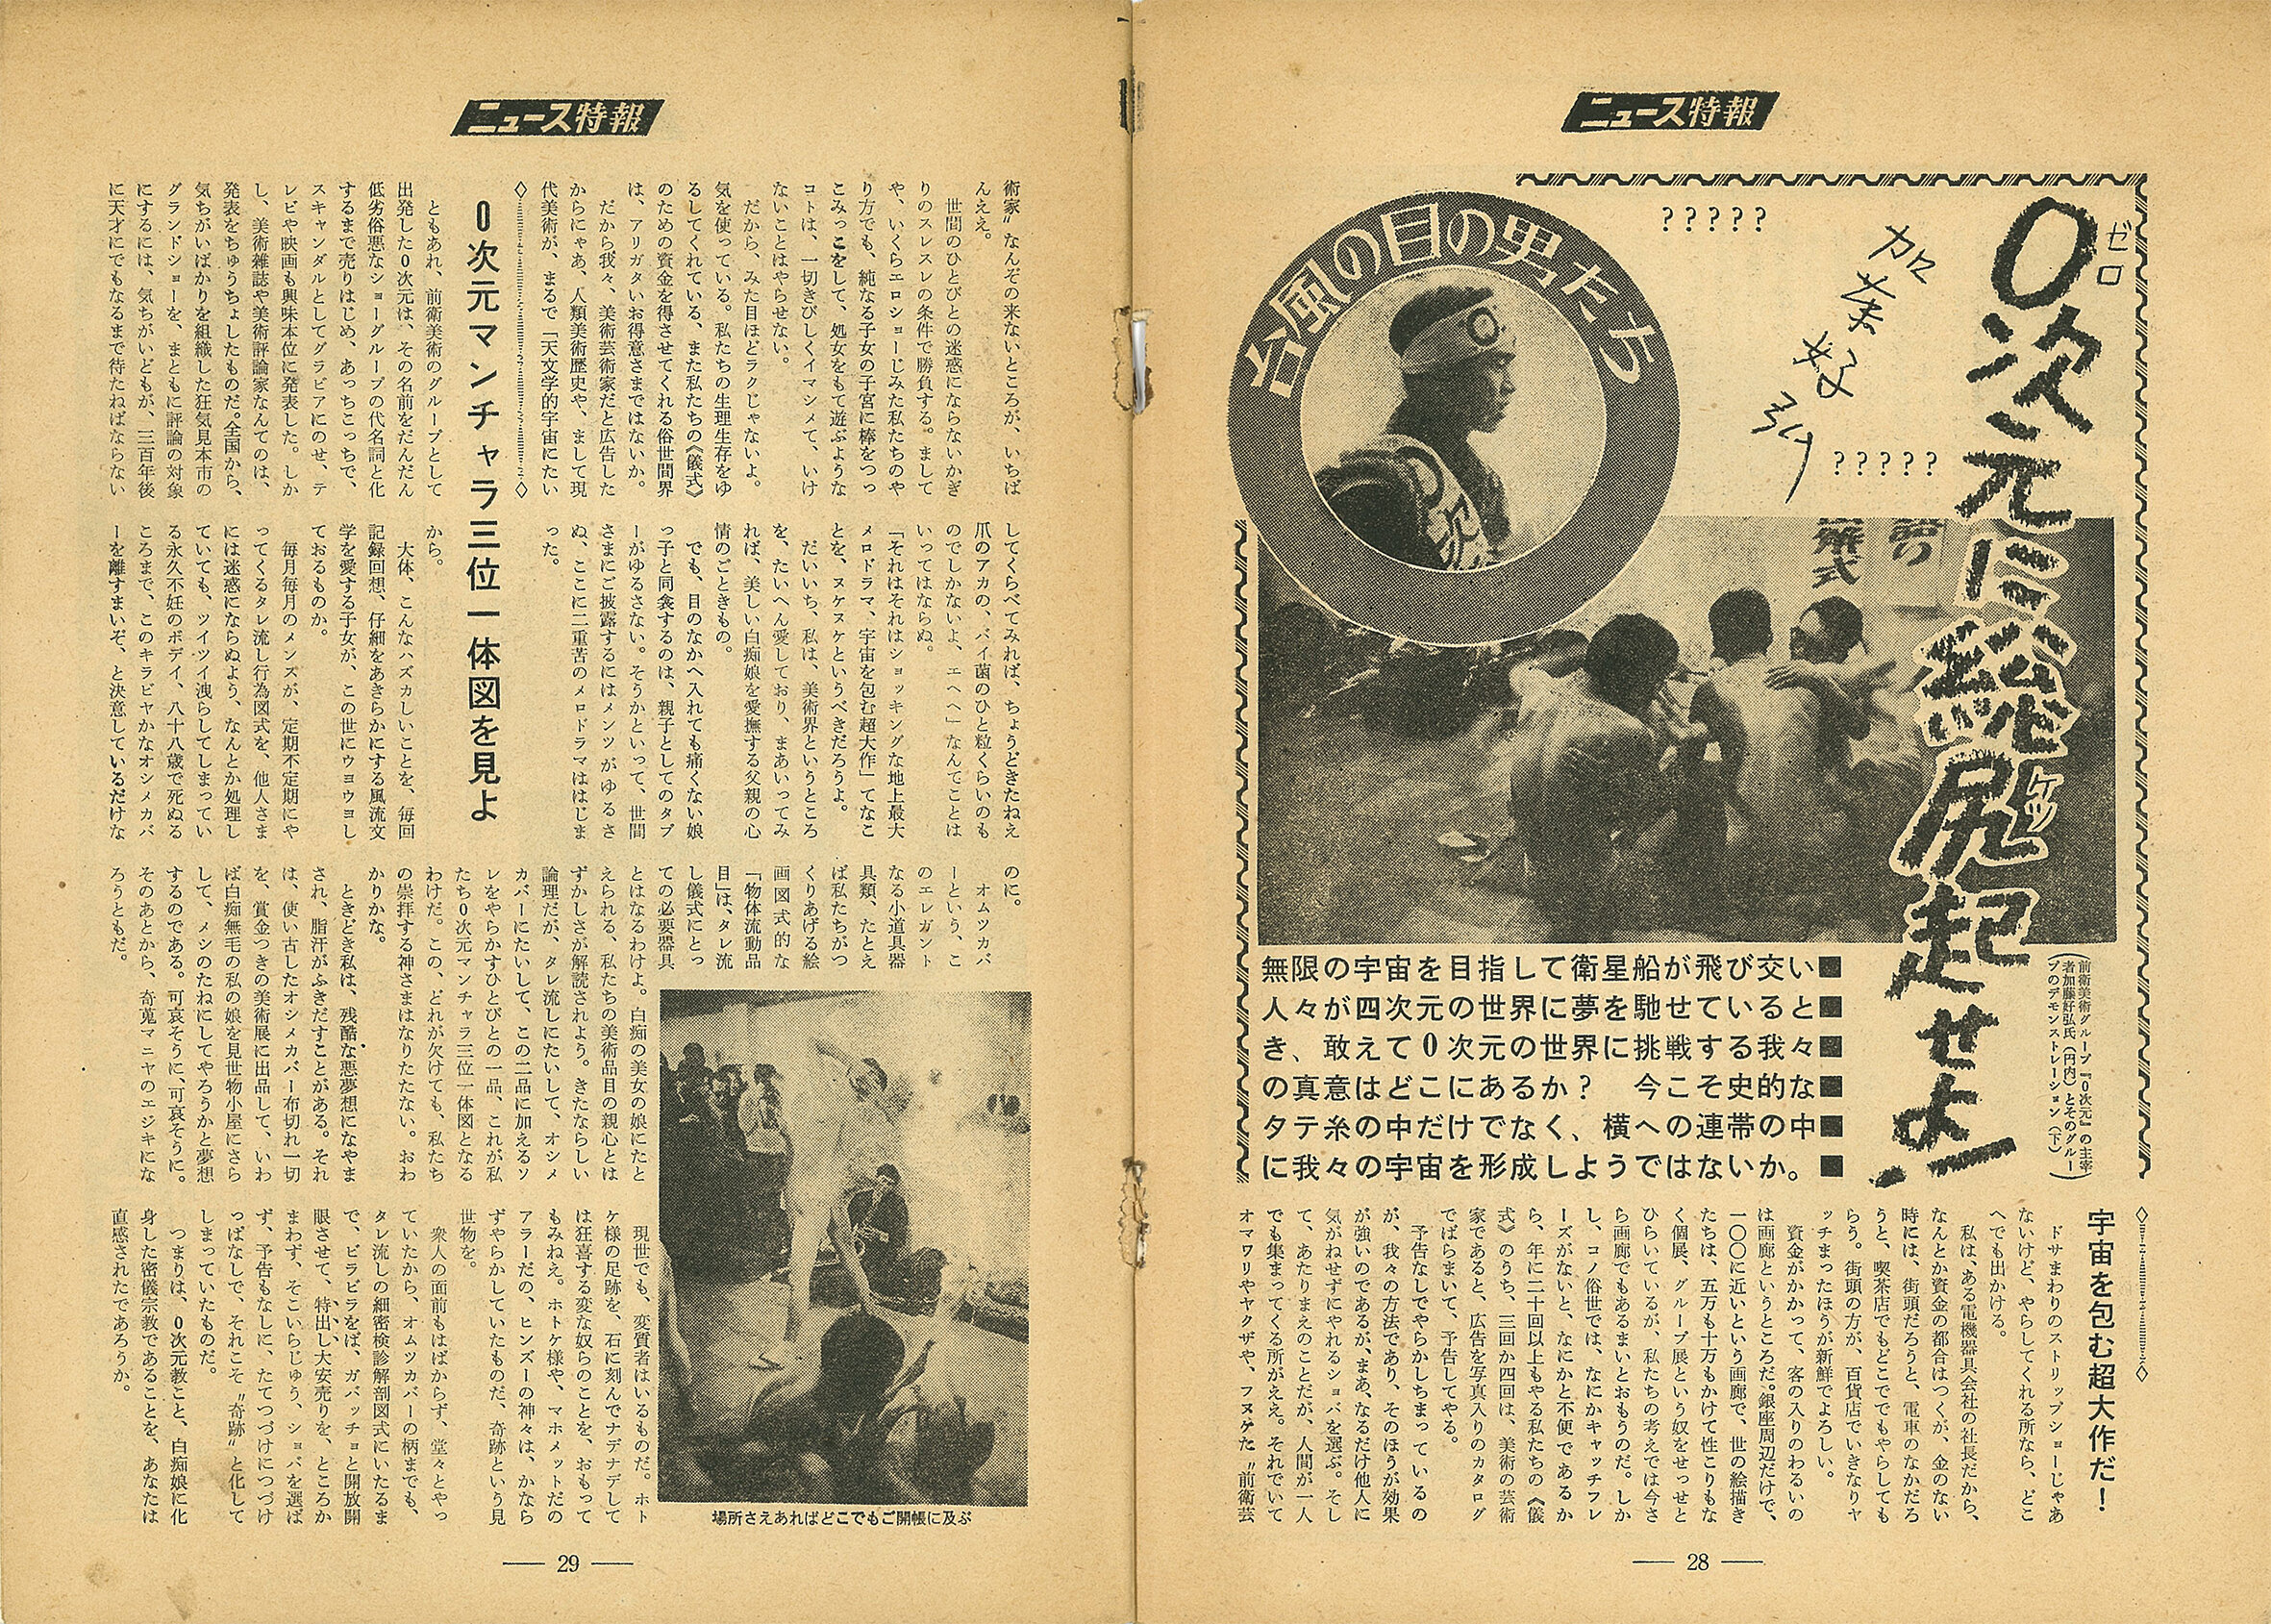  [fig. 3] News Tokuhō (Special news report), Futabasha, 1966. Collection of Aichi Prefectural Museum of Art 